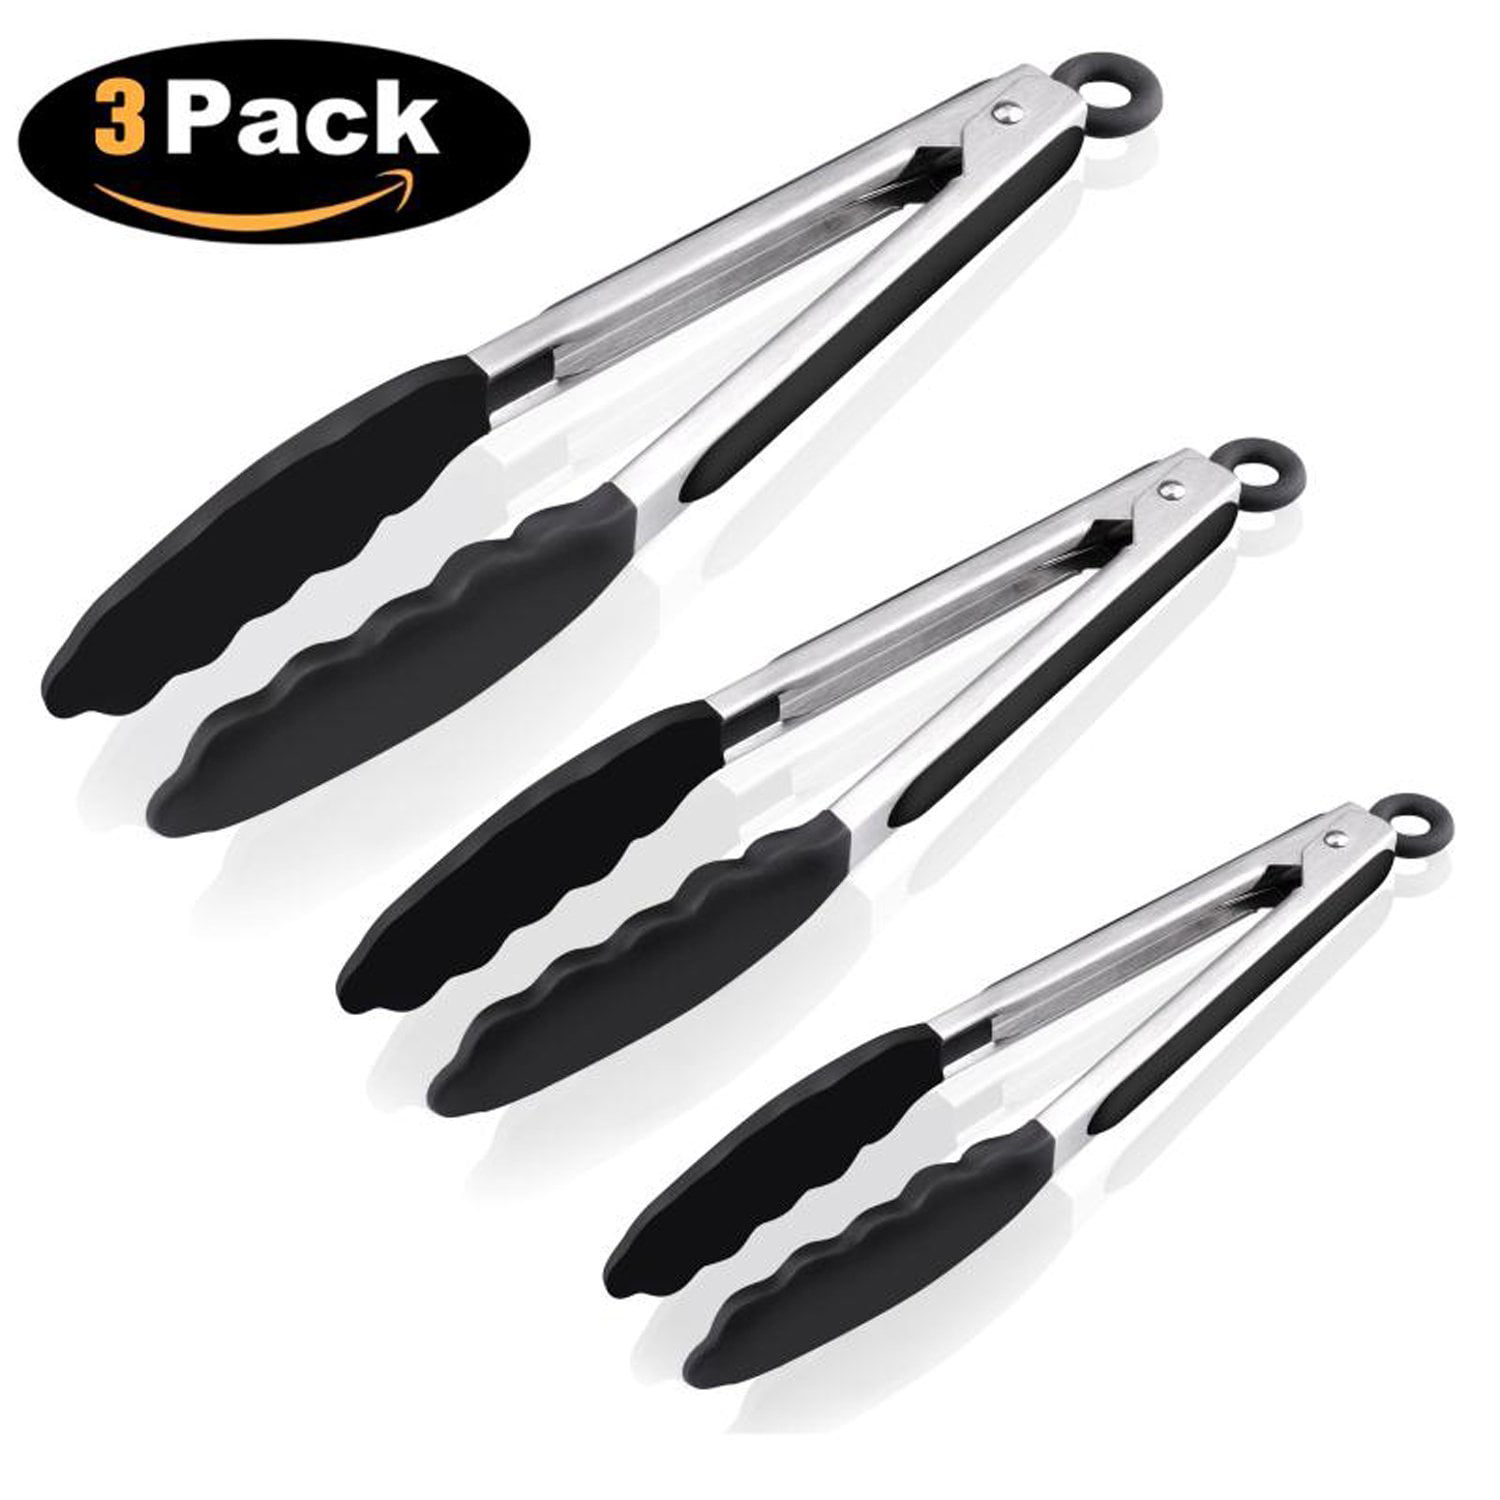 9 and 12 Inch Stainless Steel Black Set of Kitchen Tongs for Cooking or Grilling: Includes 7 3 Pack Perfect for BBQ Grill or Household Cooking Heat Resistant Locking Tongs with Silicone Tips 